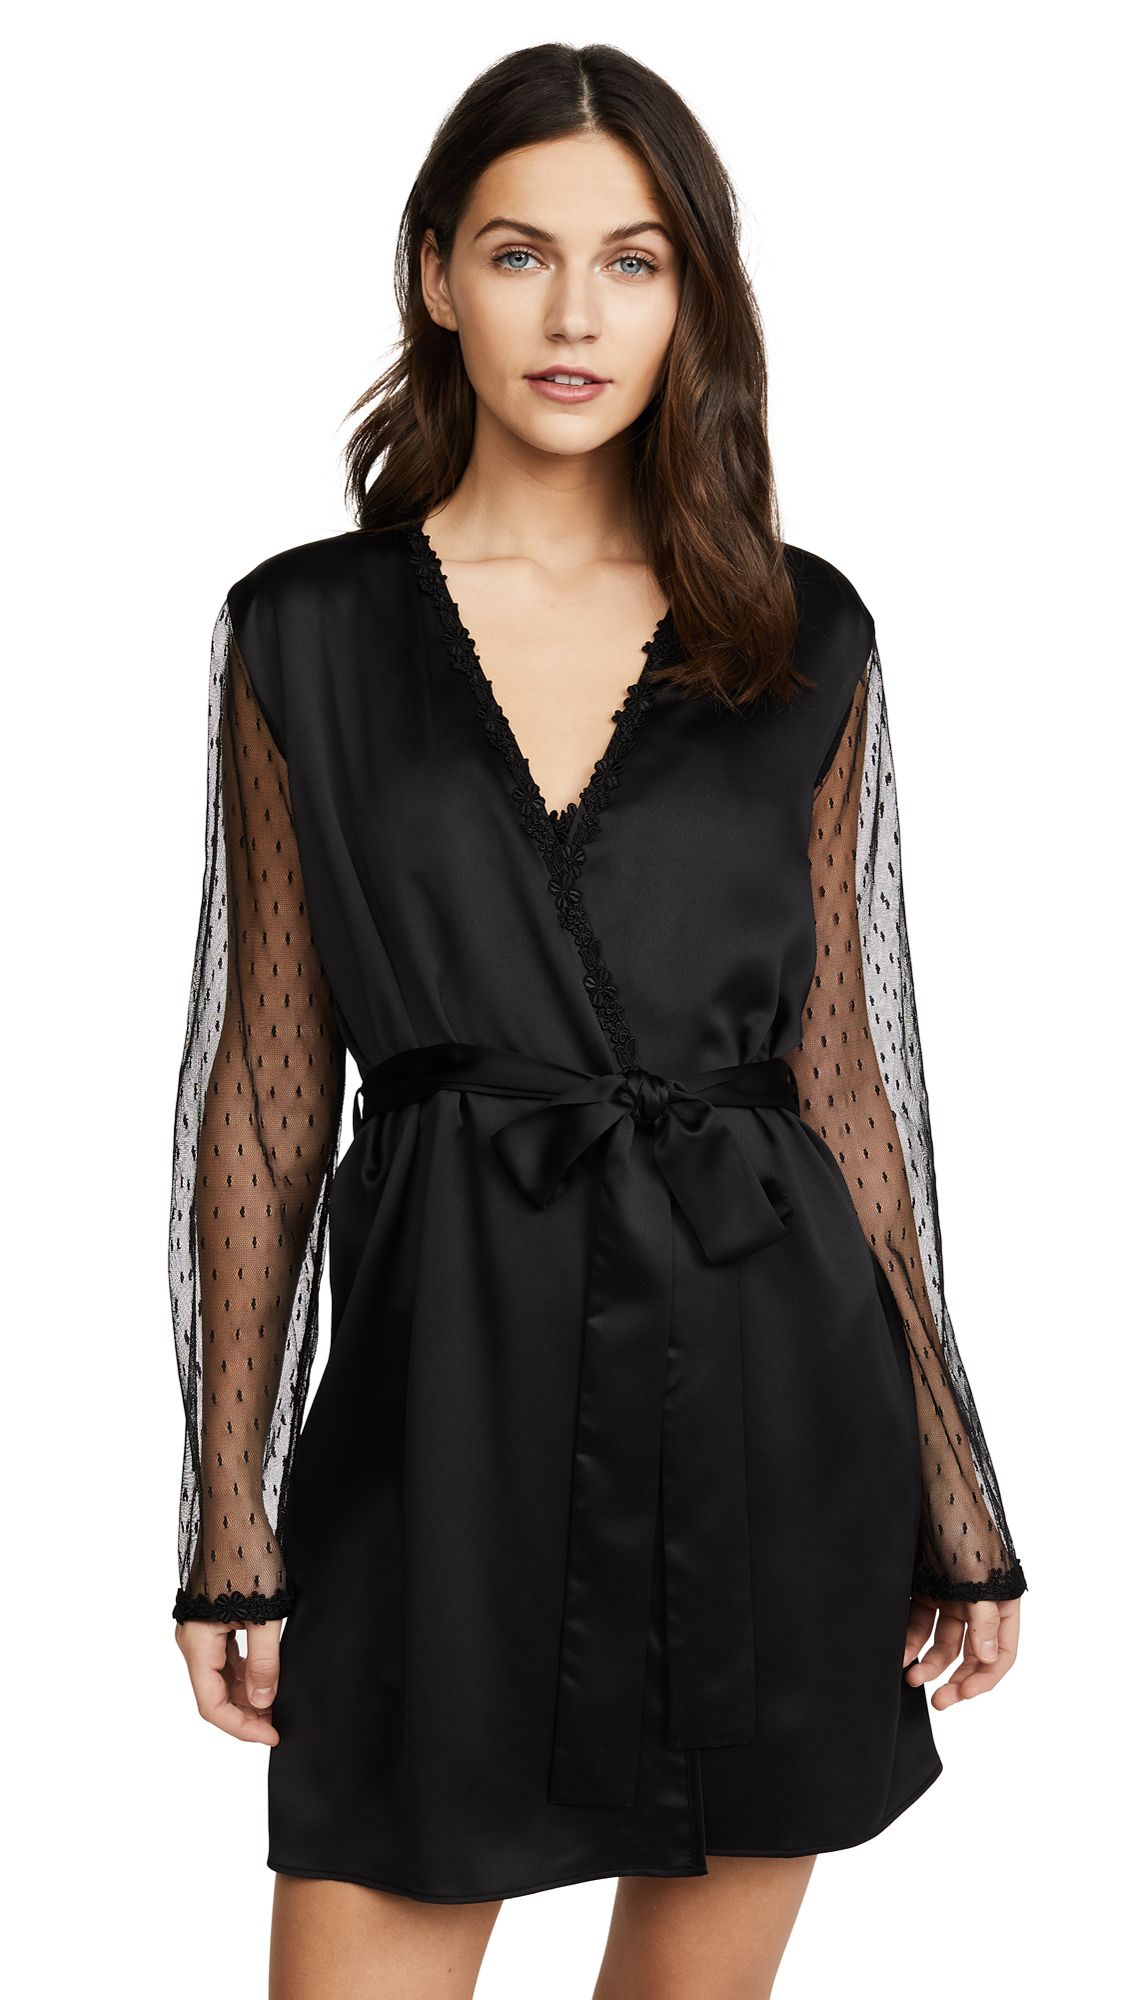 Flora Nikrooz Charmeuse Robe with Lace | Shopbop